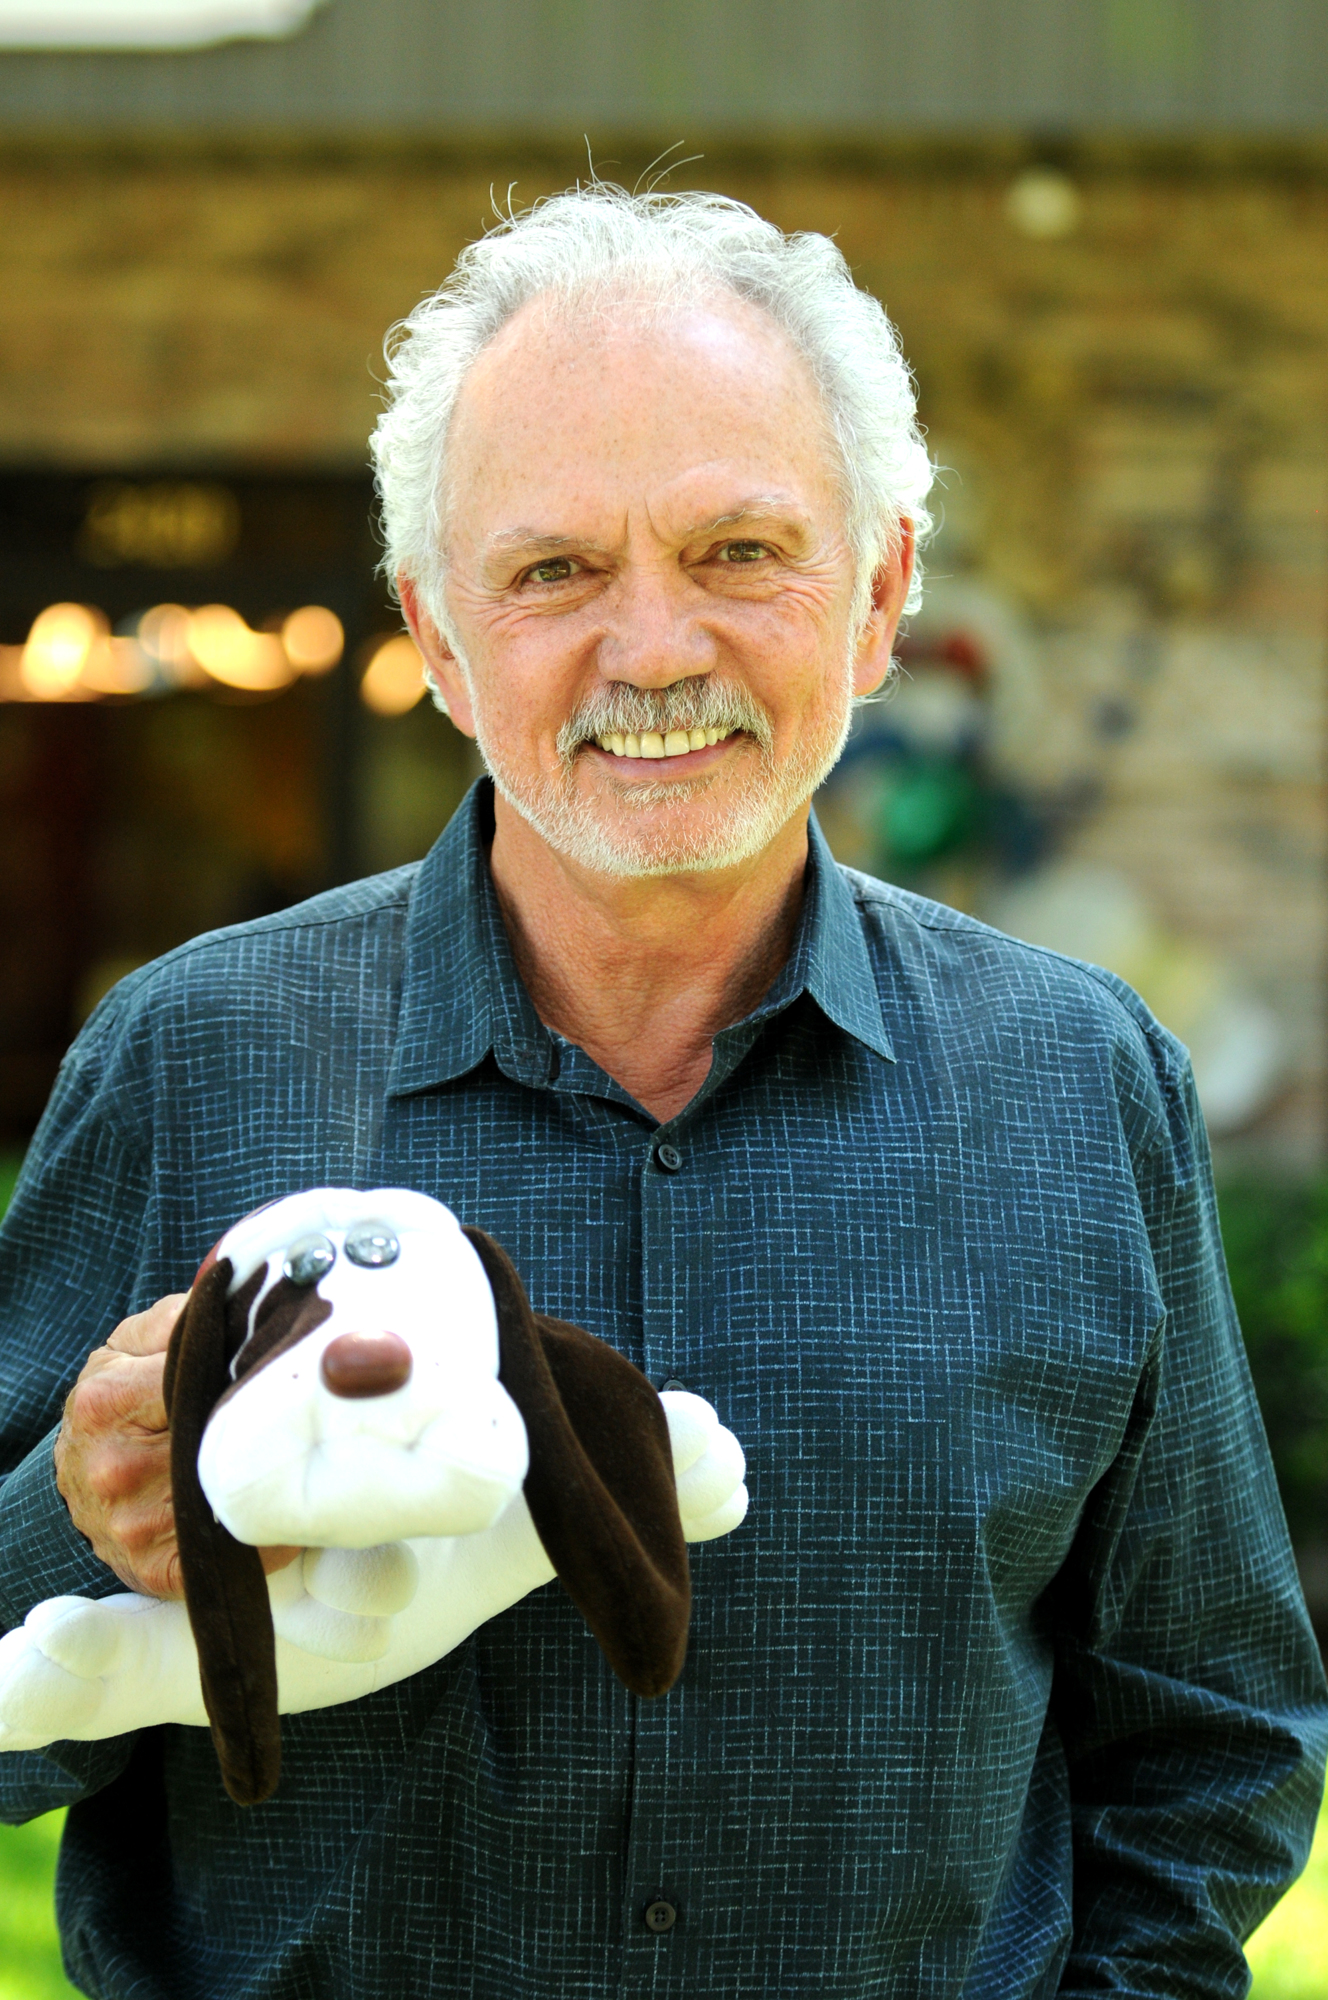 Mike Bowling, the creator of Pound Puppies, with one of his creations.